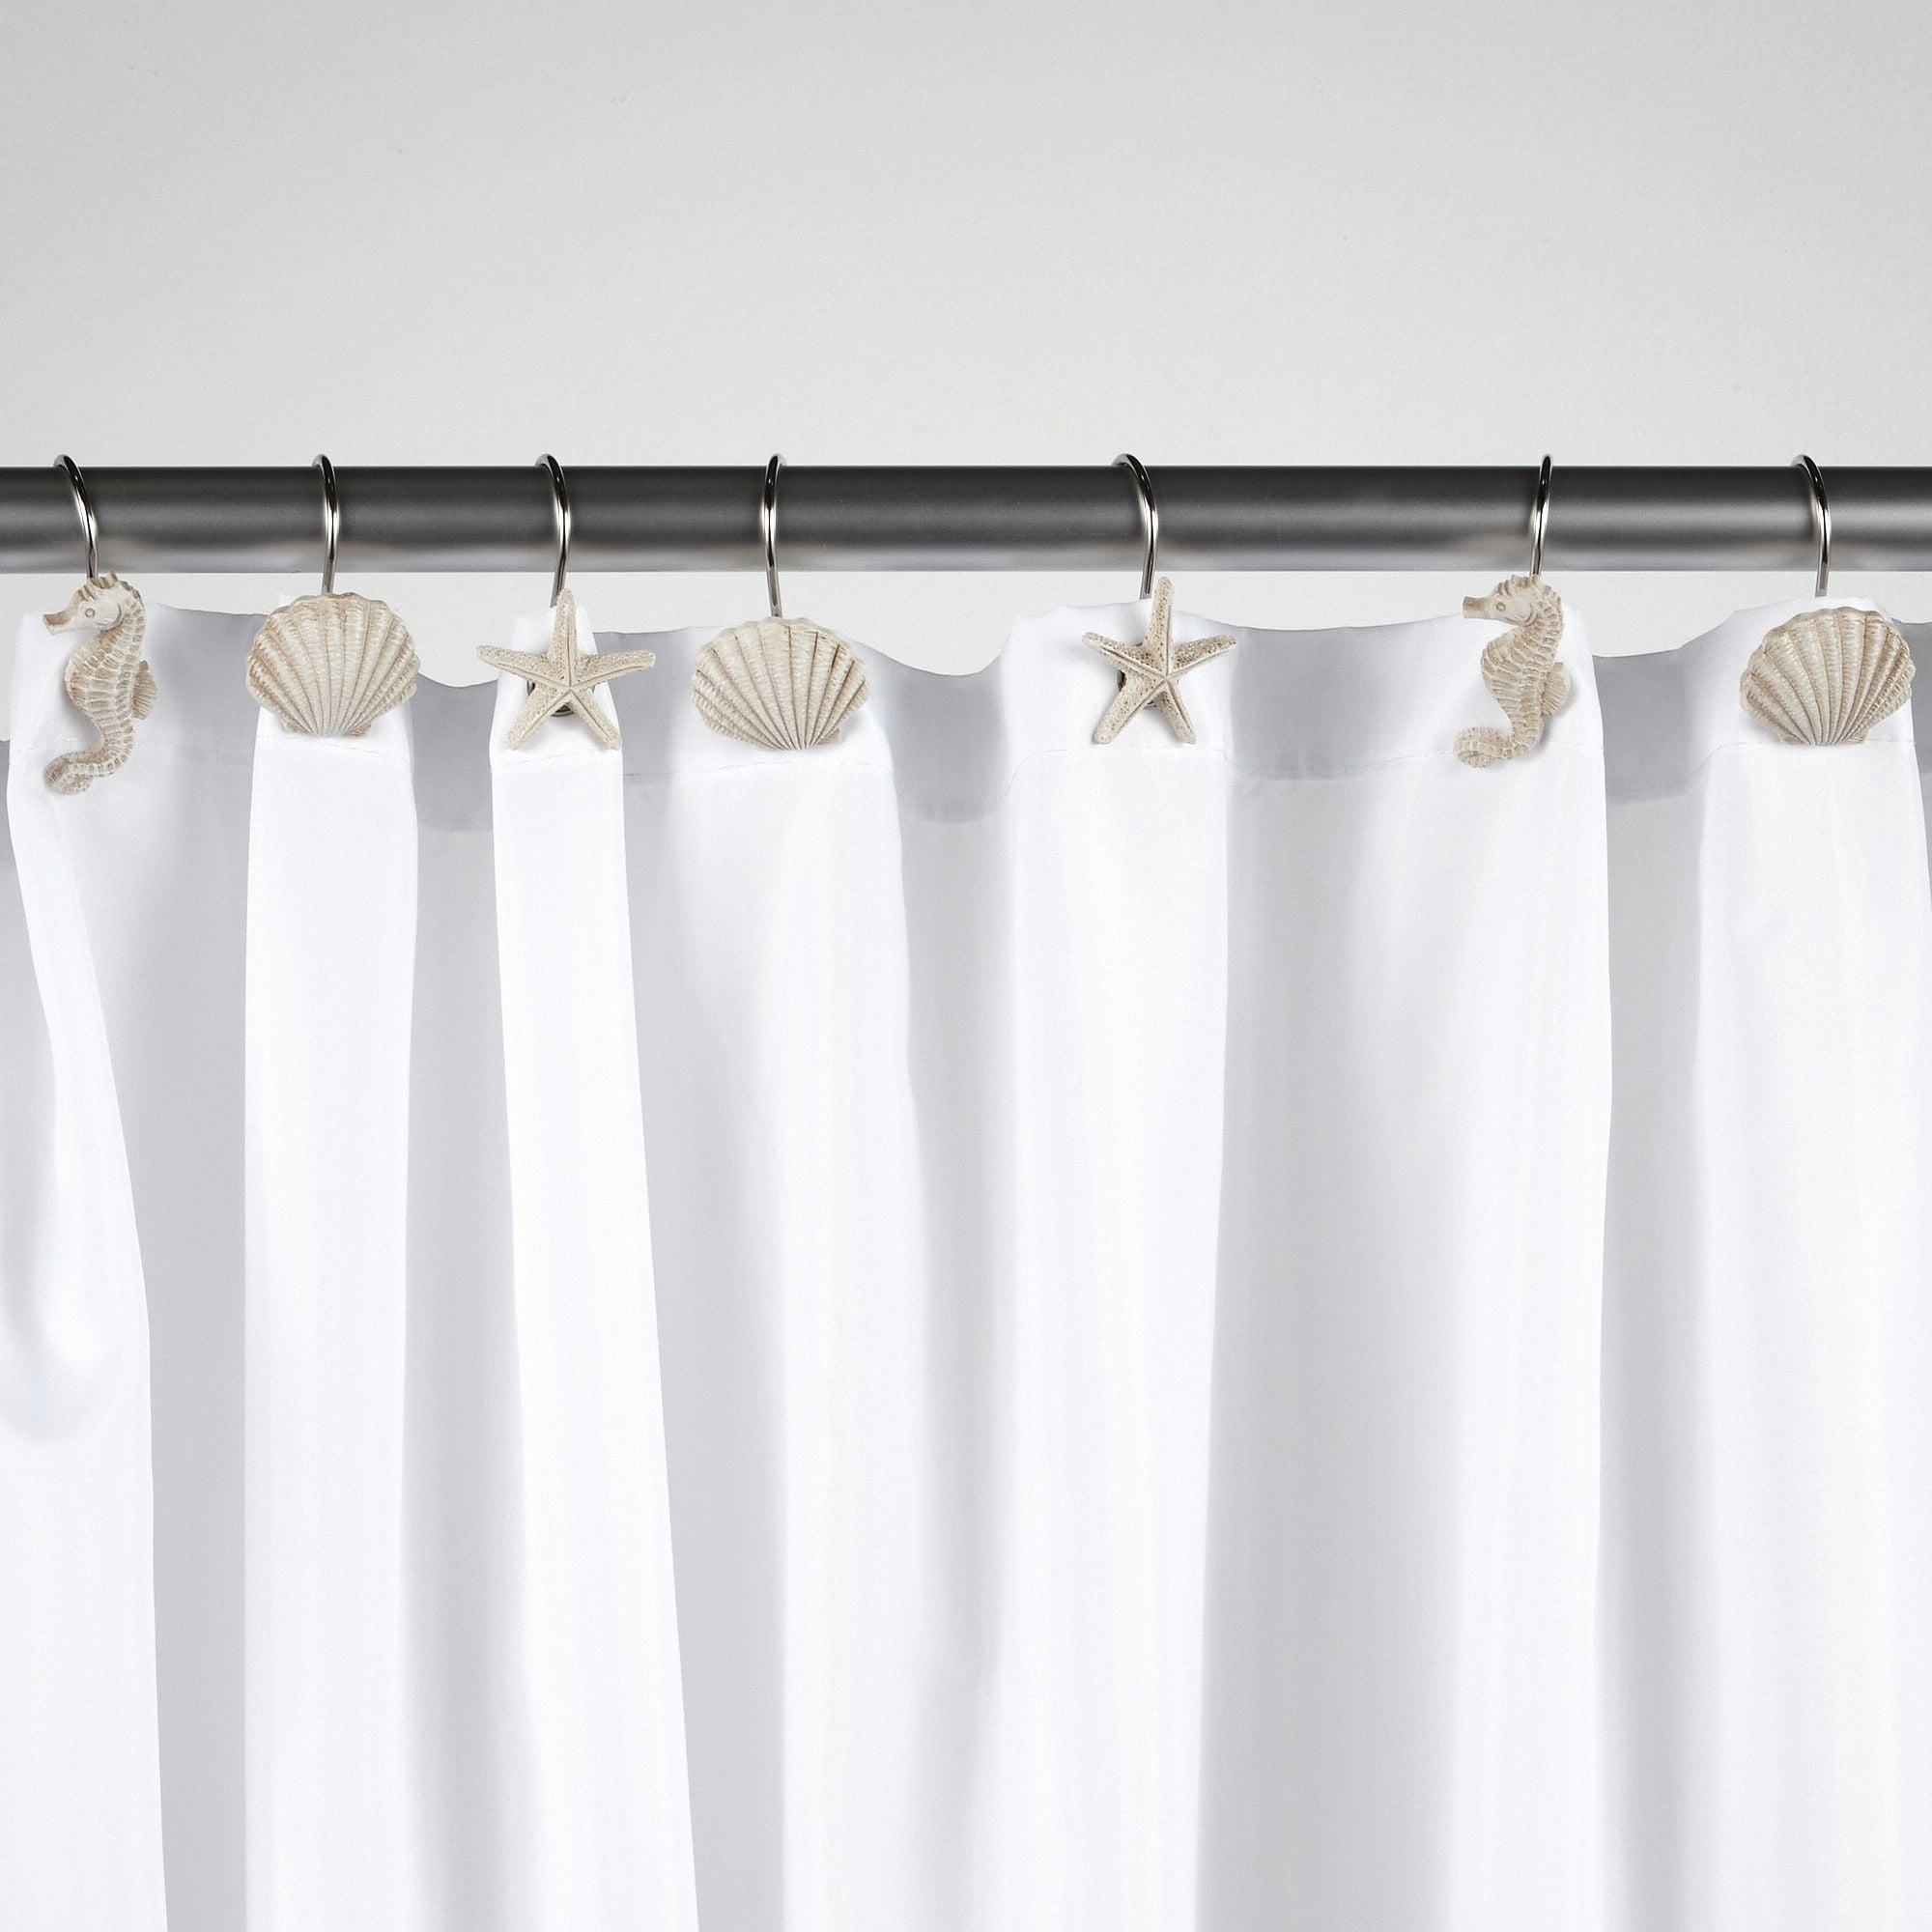 12-Pack of Beach-Themed Shower Curtain Stainless Steel Hooks